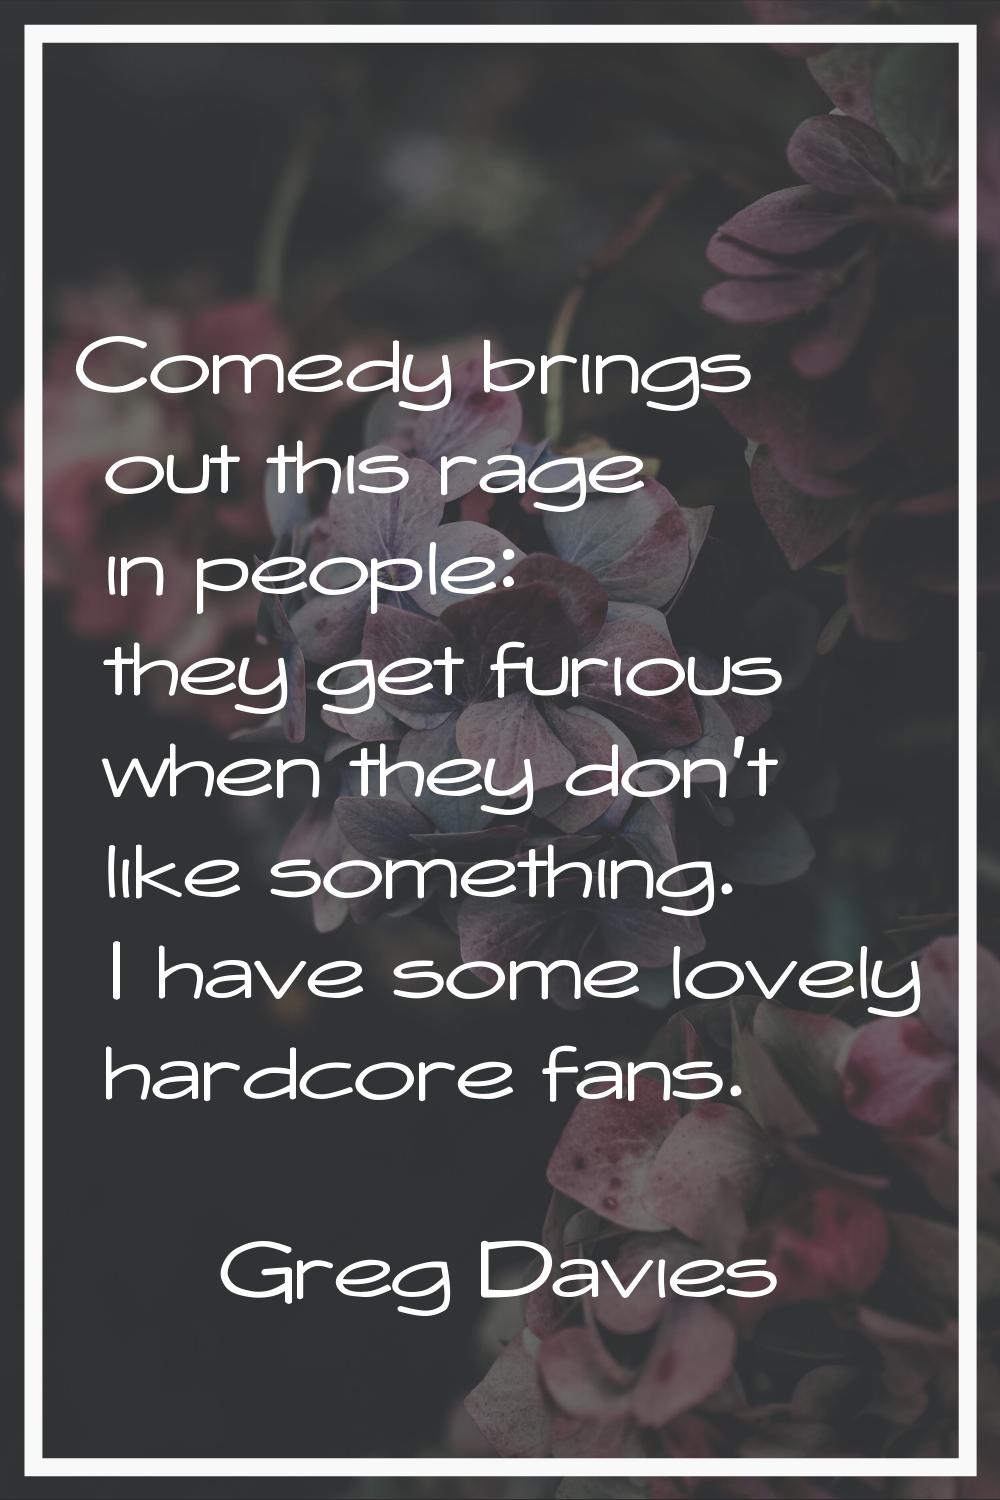 Comedy brings out this rage in people: they get furious when they don't like something. I have some